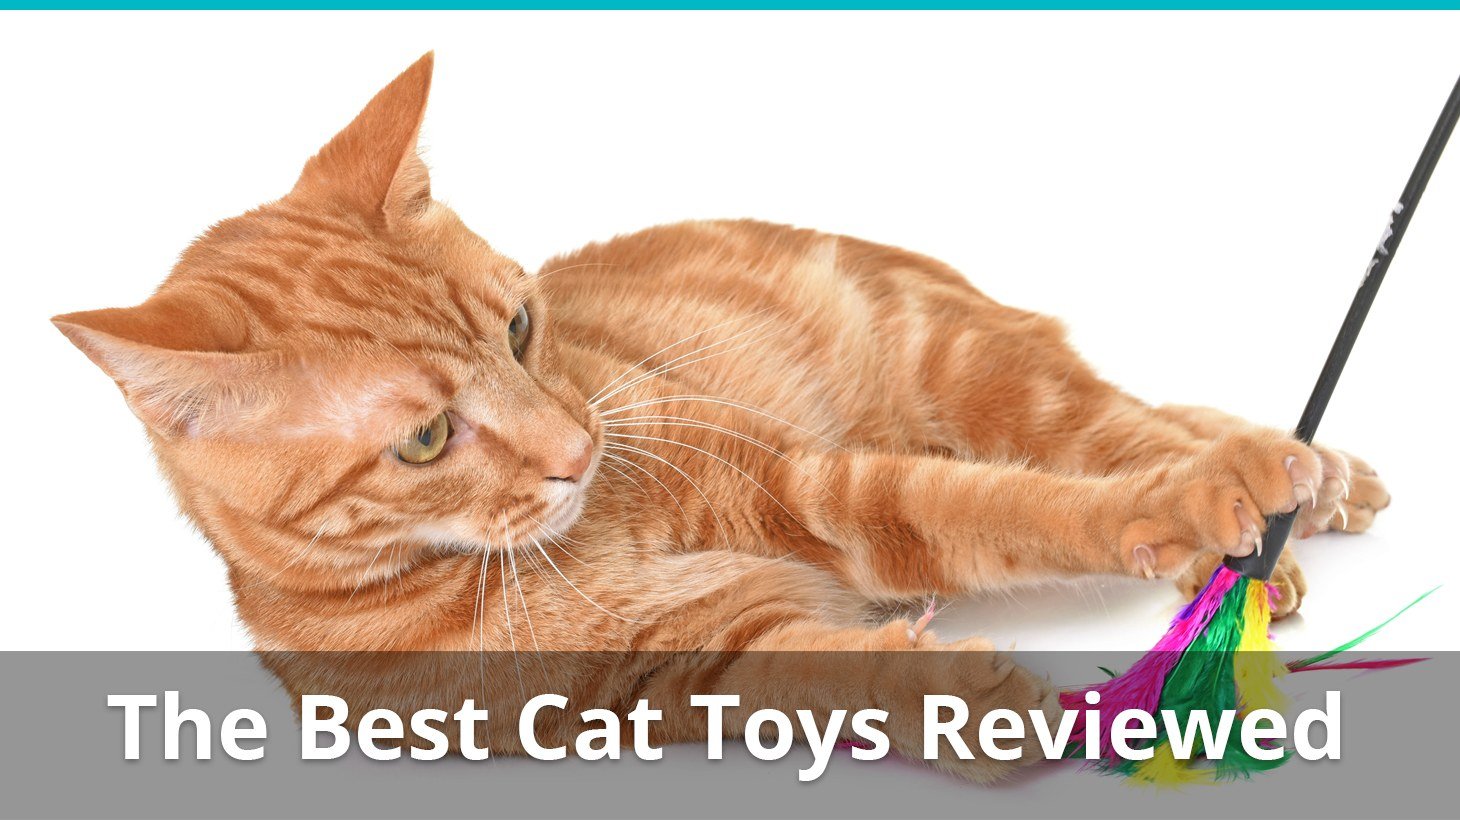 Our Huge List of the Best Cat Toys in 